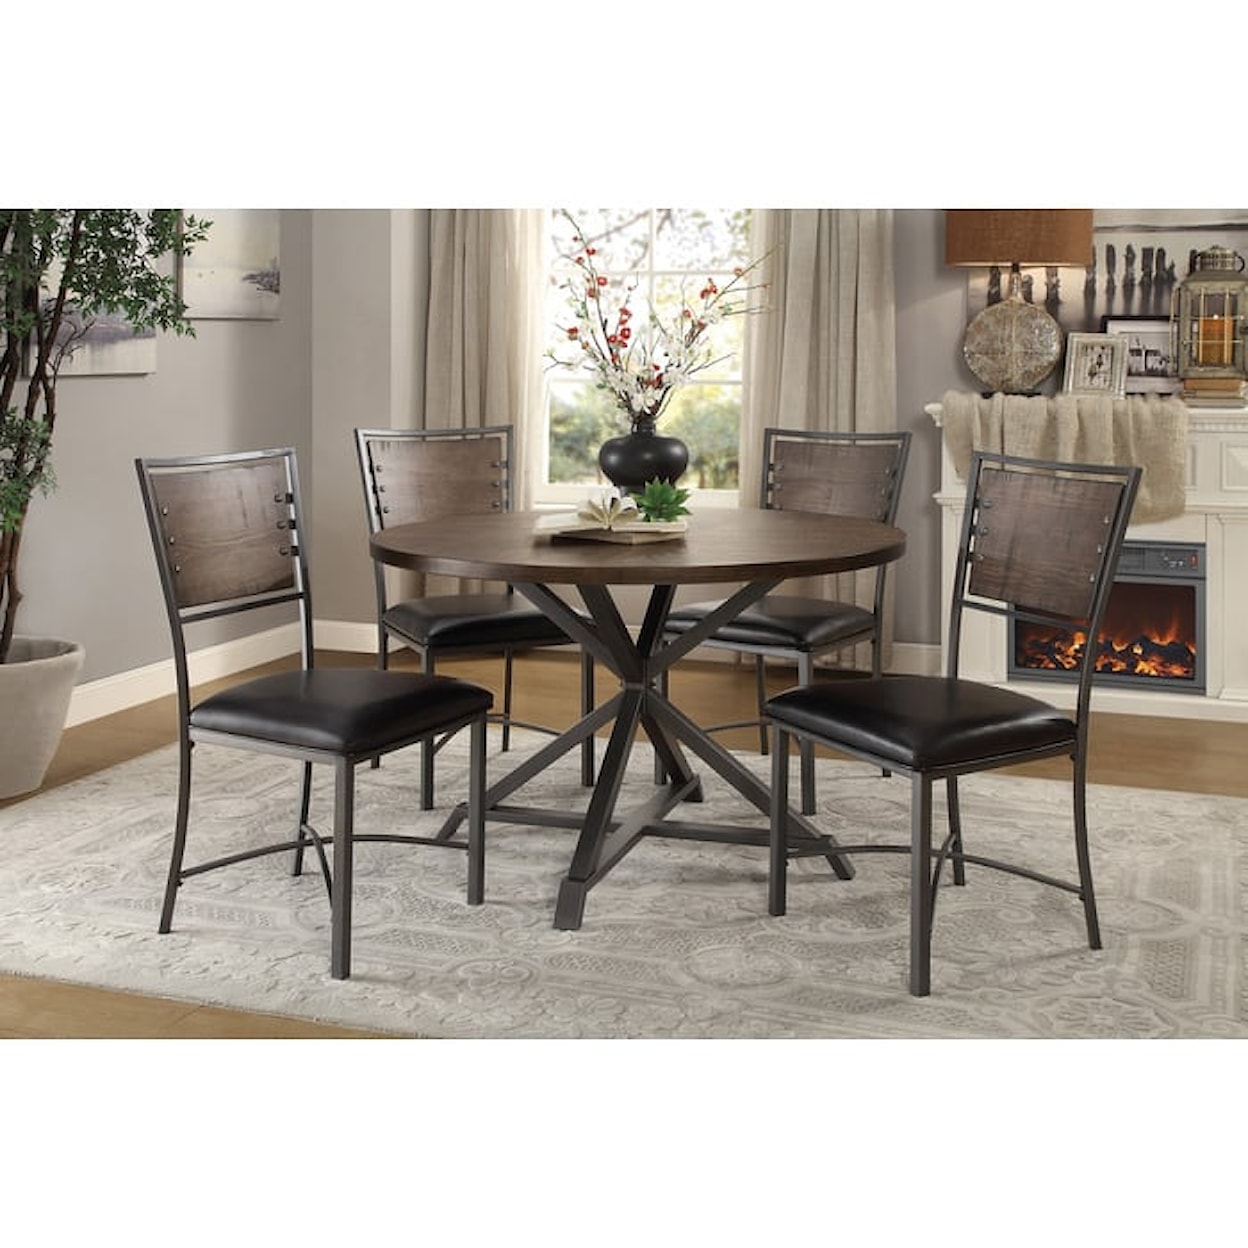 Homelegance Fideo Side Dining Chair